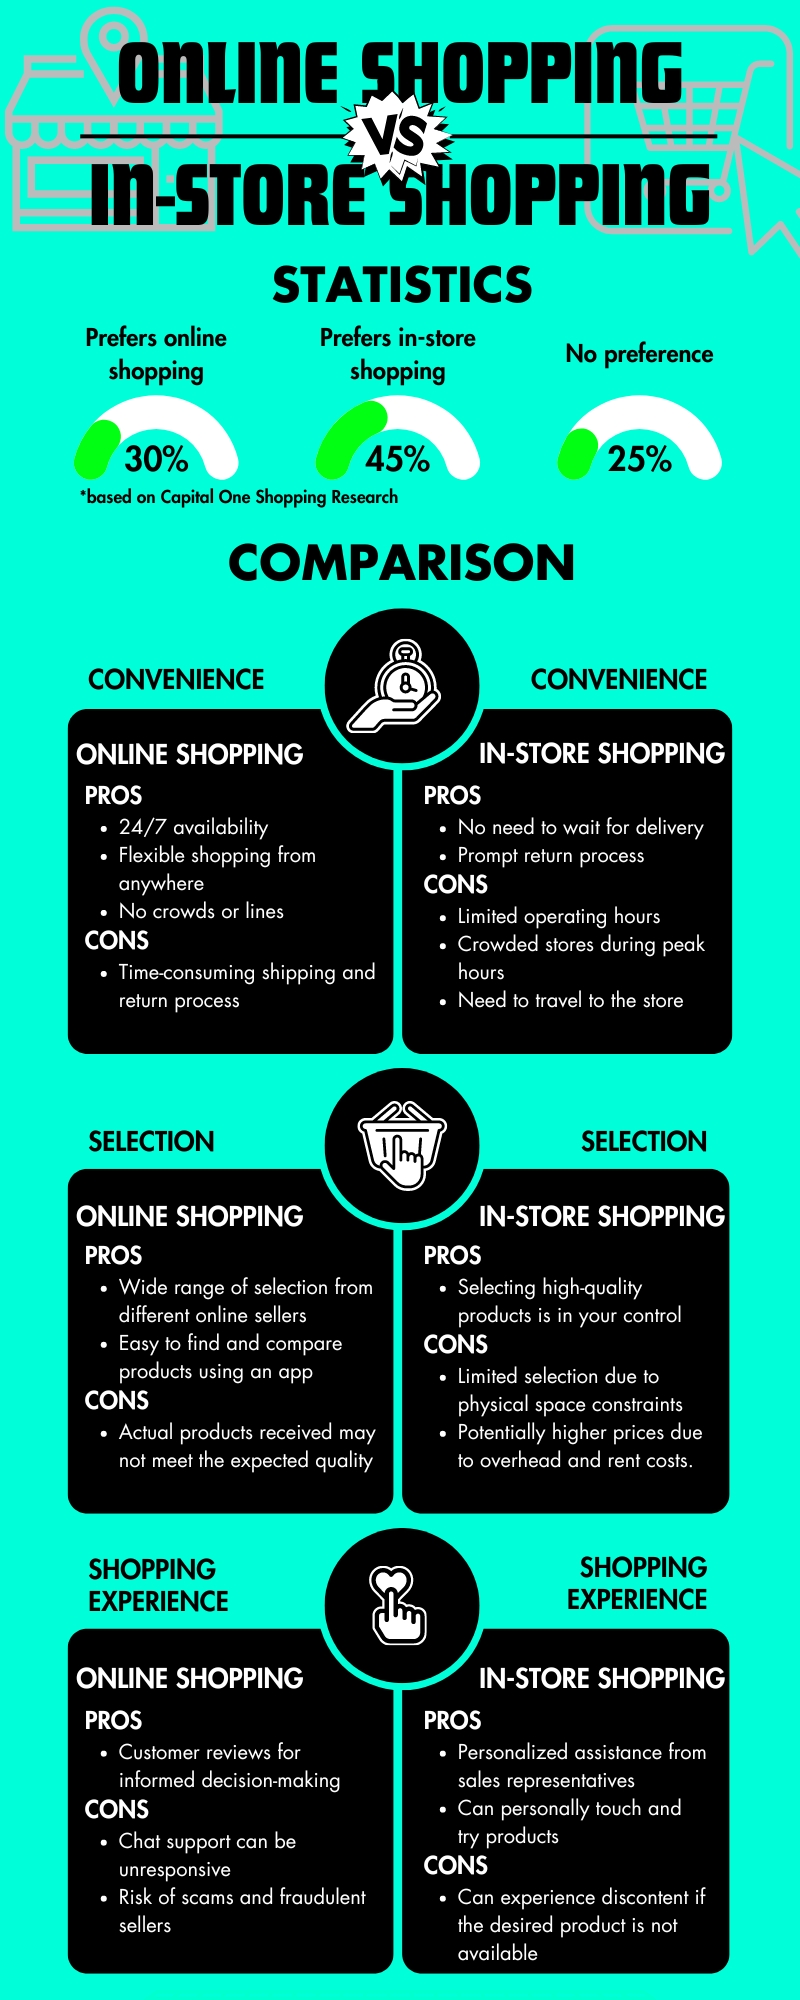 An infographic on the comparison between online shopping and in-store shopping.